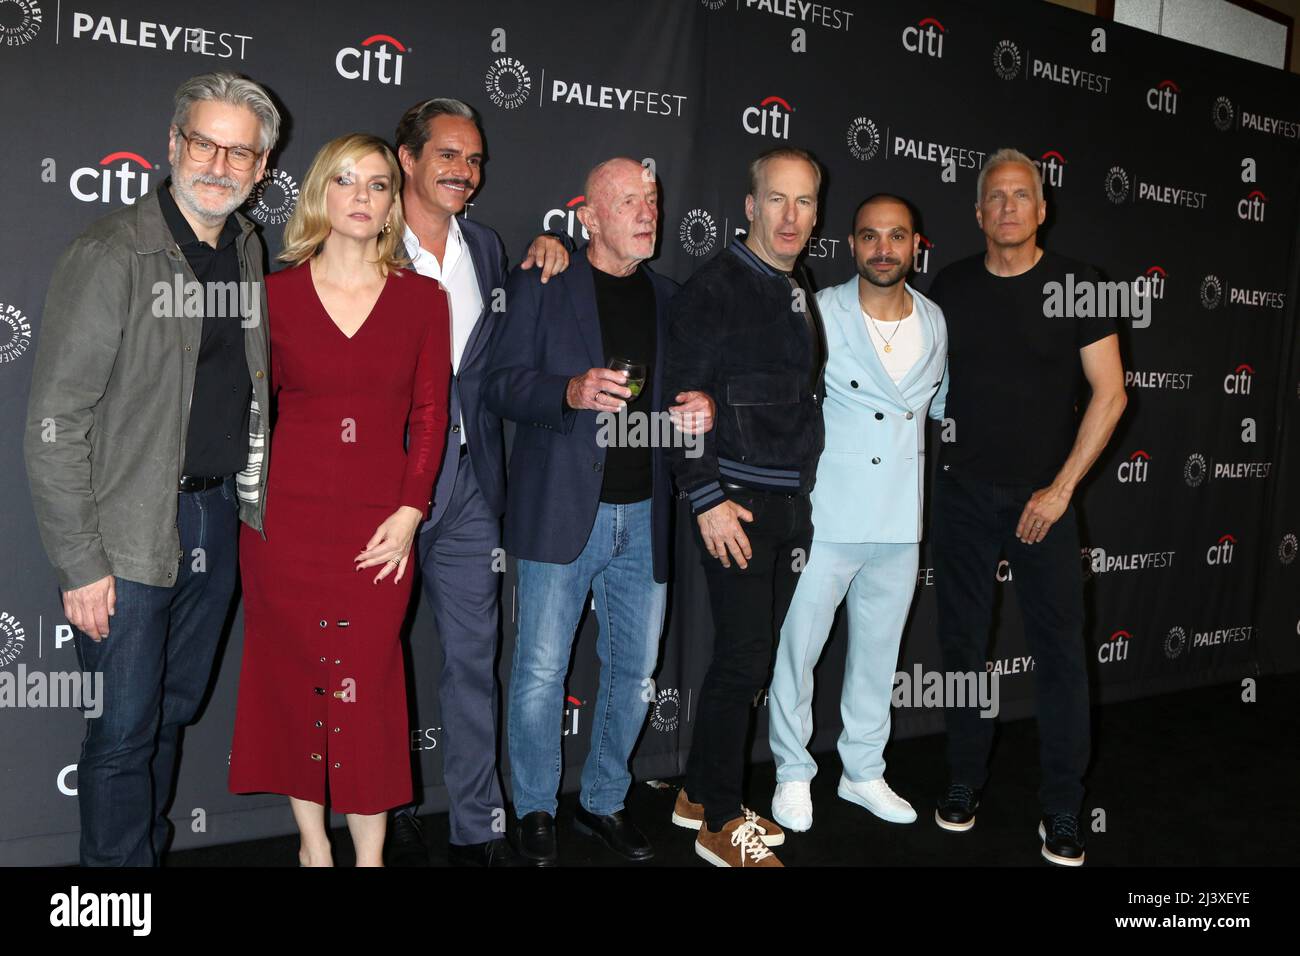 LOS ANGELES - APR 9:  Peter Gould, Rhea Seehorn, Tony Dalton, Johnathan Banks, Bob Odenkirk, Michael Mando, Patrick Fabian, Giancarlo Esposito at the PaleyFEST 2022 - Better Call Saul at Dolby Theater on April 9, 2022  in Los Angeles, CA Stock Photo